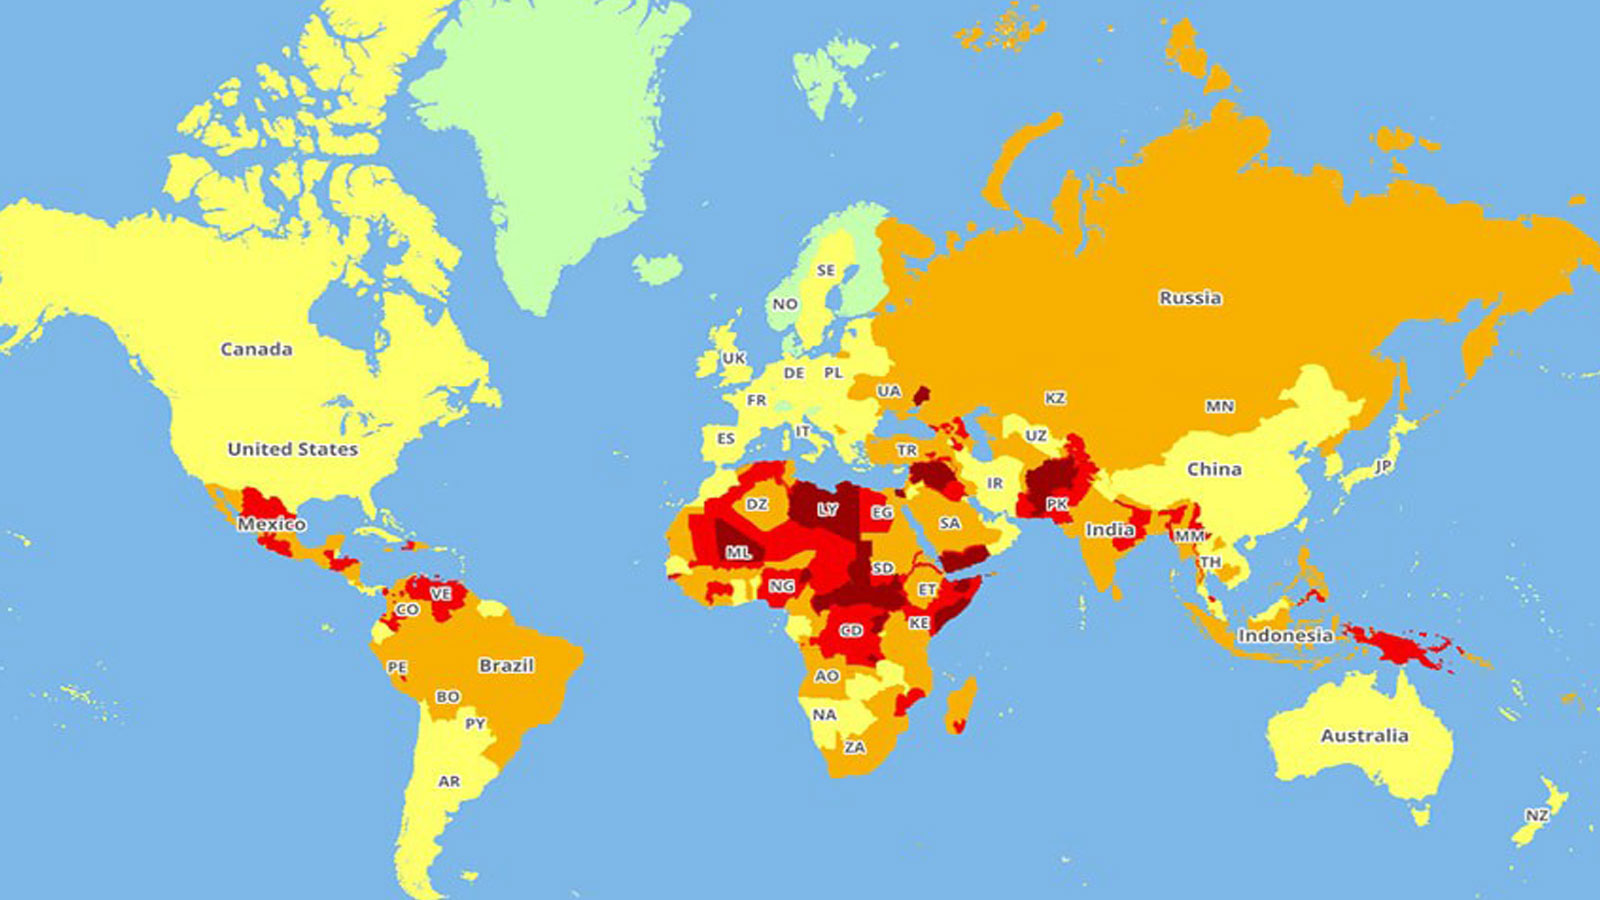 Iran safety for tourists according to 2019 SOS travel risk map